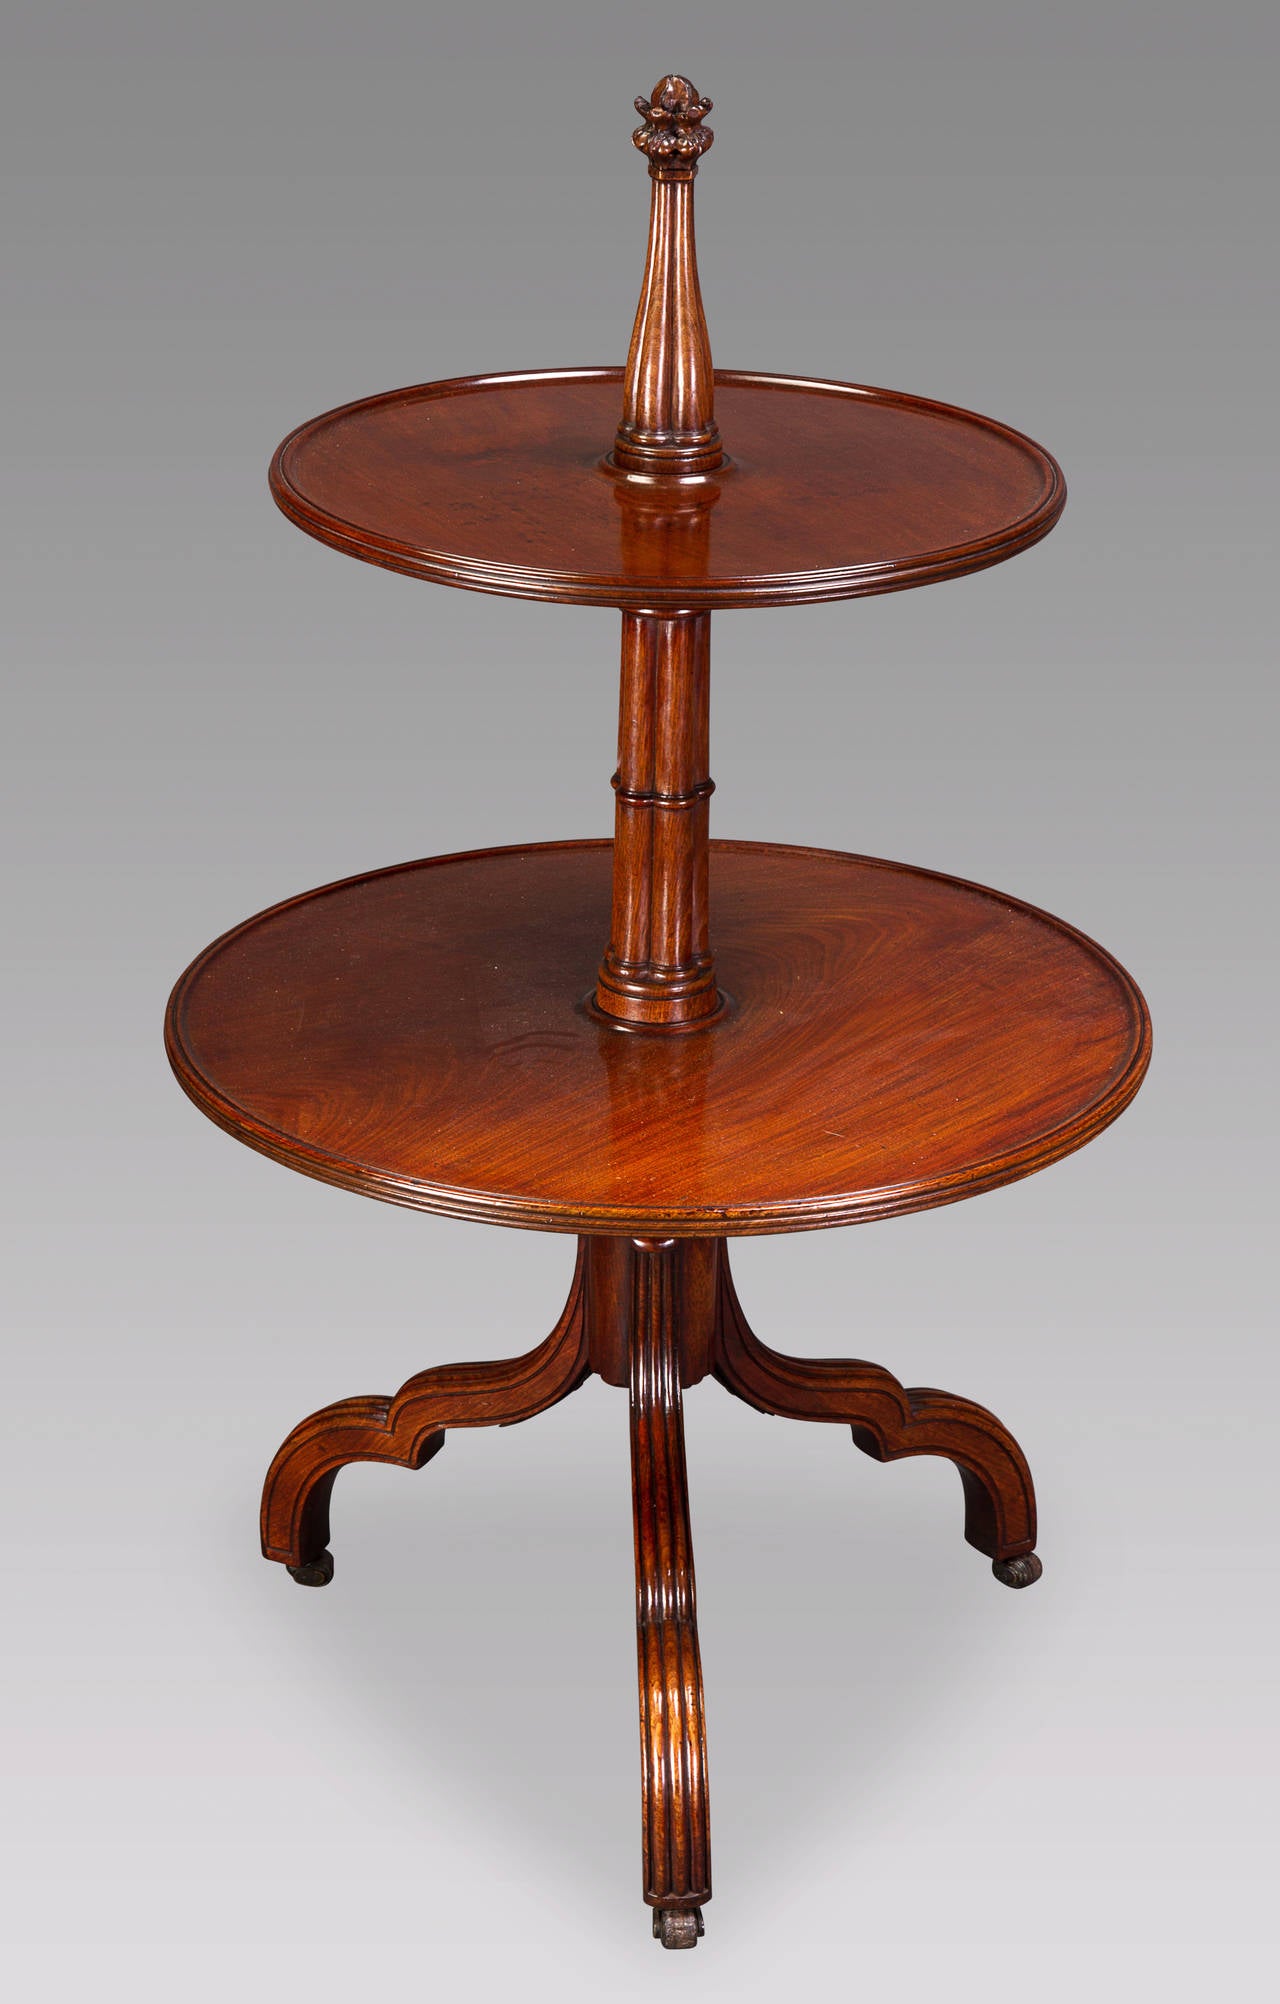 Of excellent quality timber, the column with finely defined cluster of columns bound by lobed collars and topped with a well carved Gothic crocket, the two revolving tiers reeded to the edges, the shaped & reeded tripod legs terminating in the